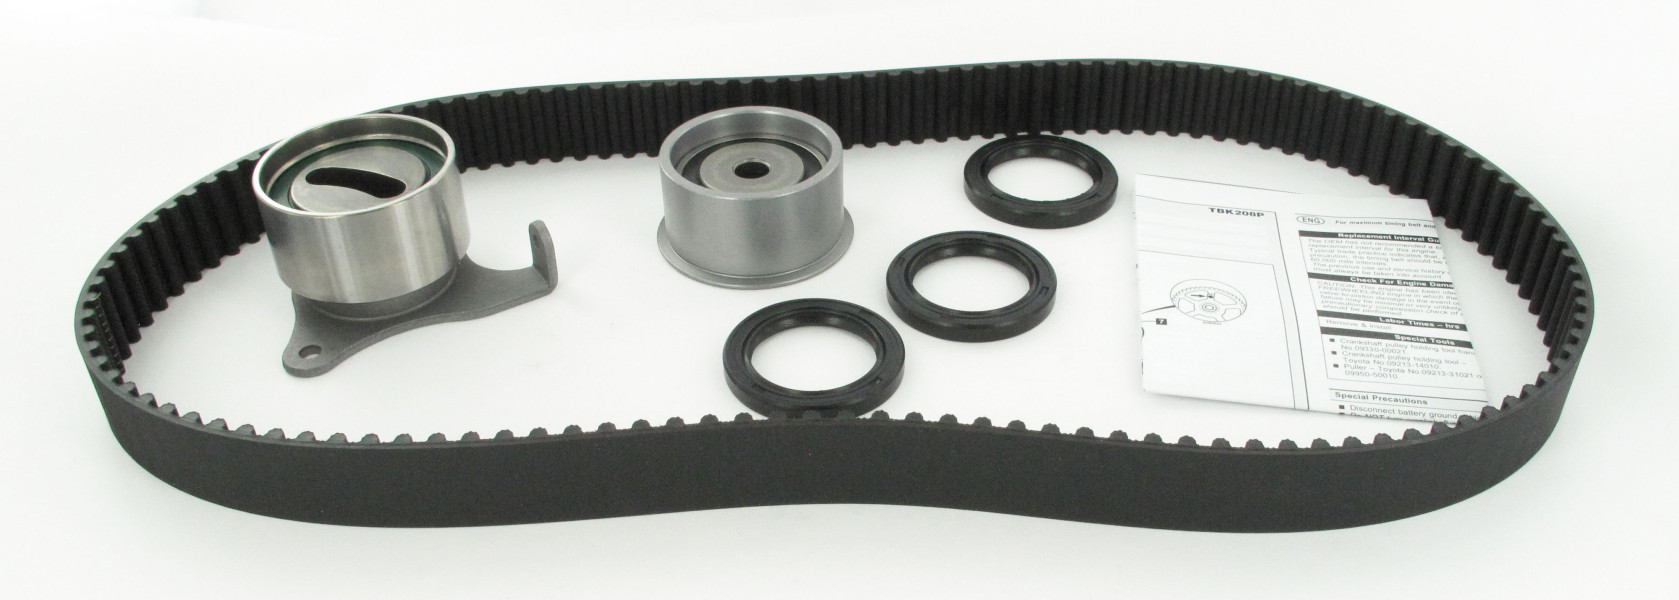 Image of Timing Belt And Seal Kit from SKF. Part number: SKF-TBK208P